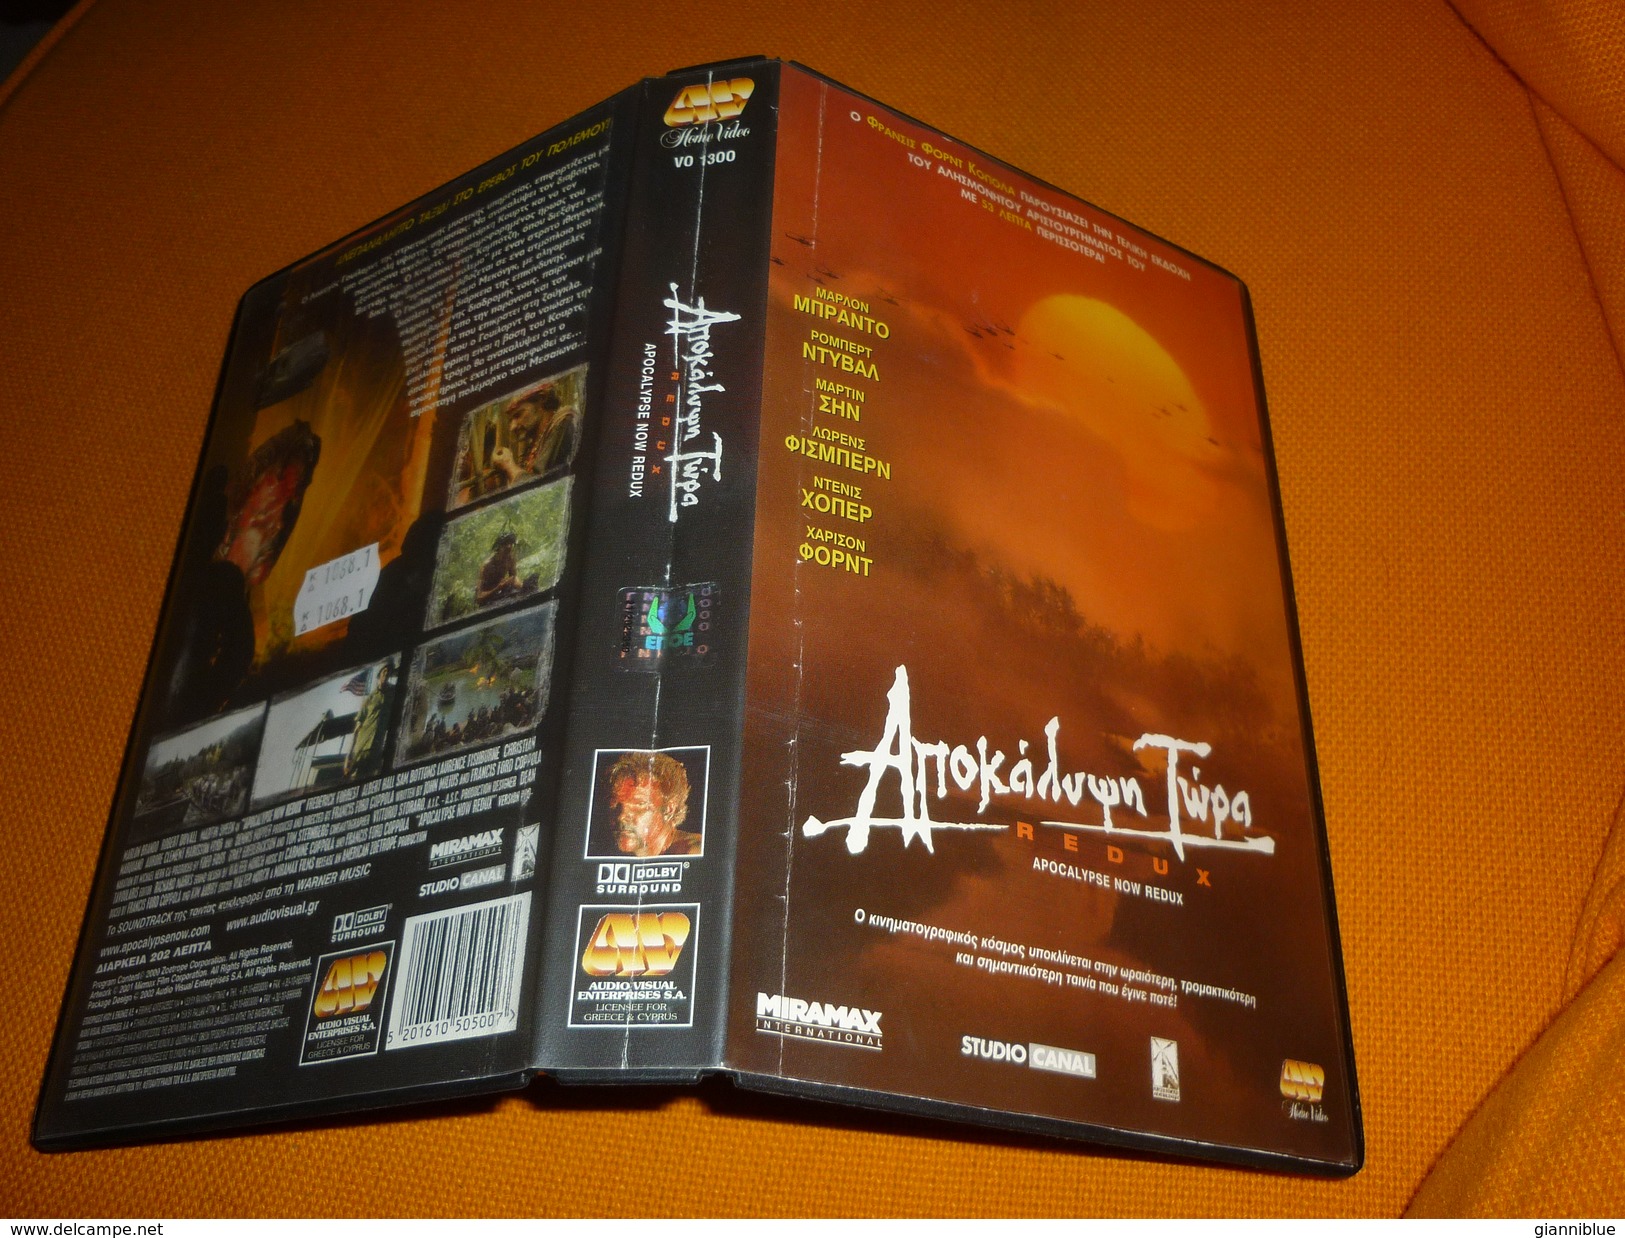 Apocalypse Now Redux Old Greek Vhs Cassette Tape From Greece - Action, Adventure